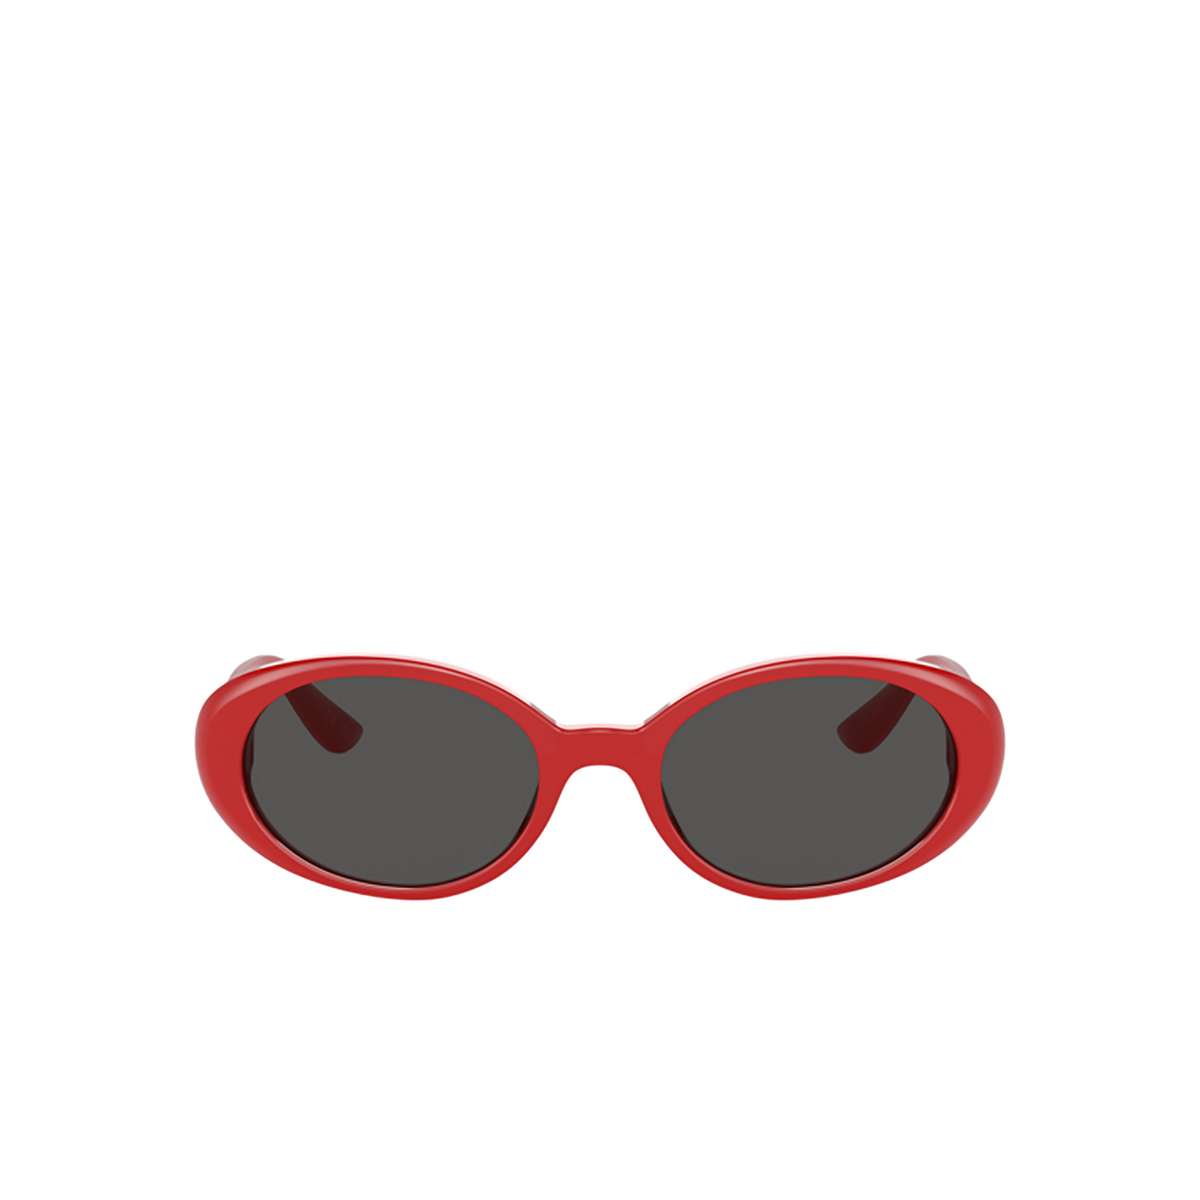 Dolce & Gabbana DG4443 Sunglasses 308887 Red - front view